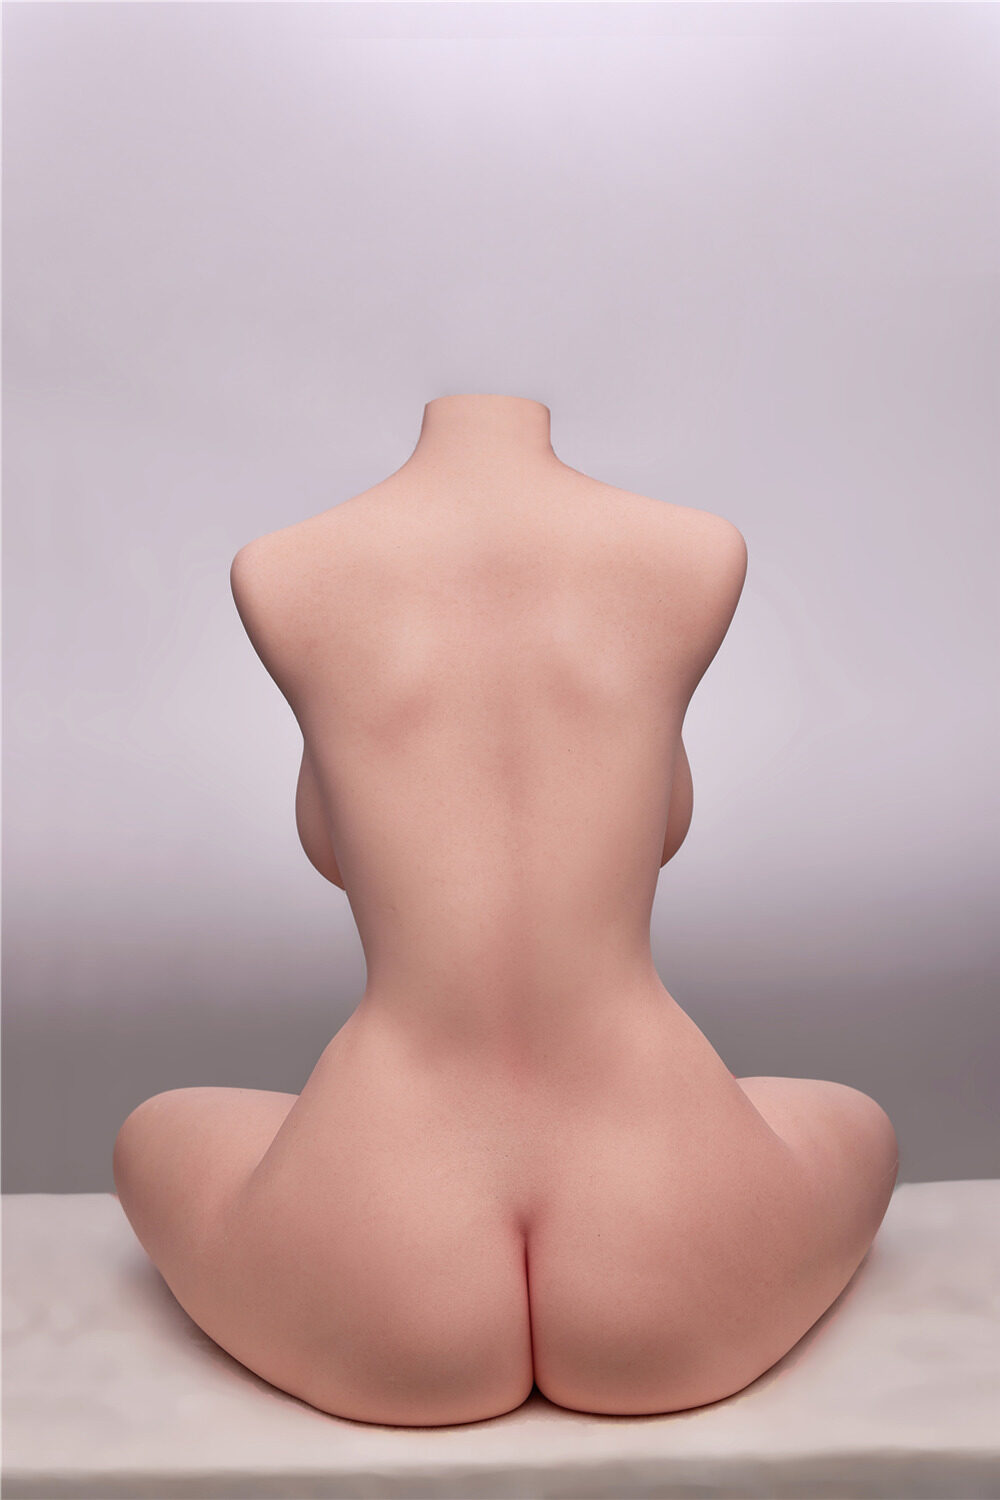 Lark - 95cm(3ft1) Irontech Doll E-Cup Skin For Silicone Sex Dolls image13